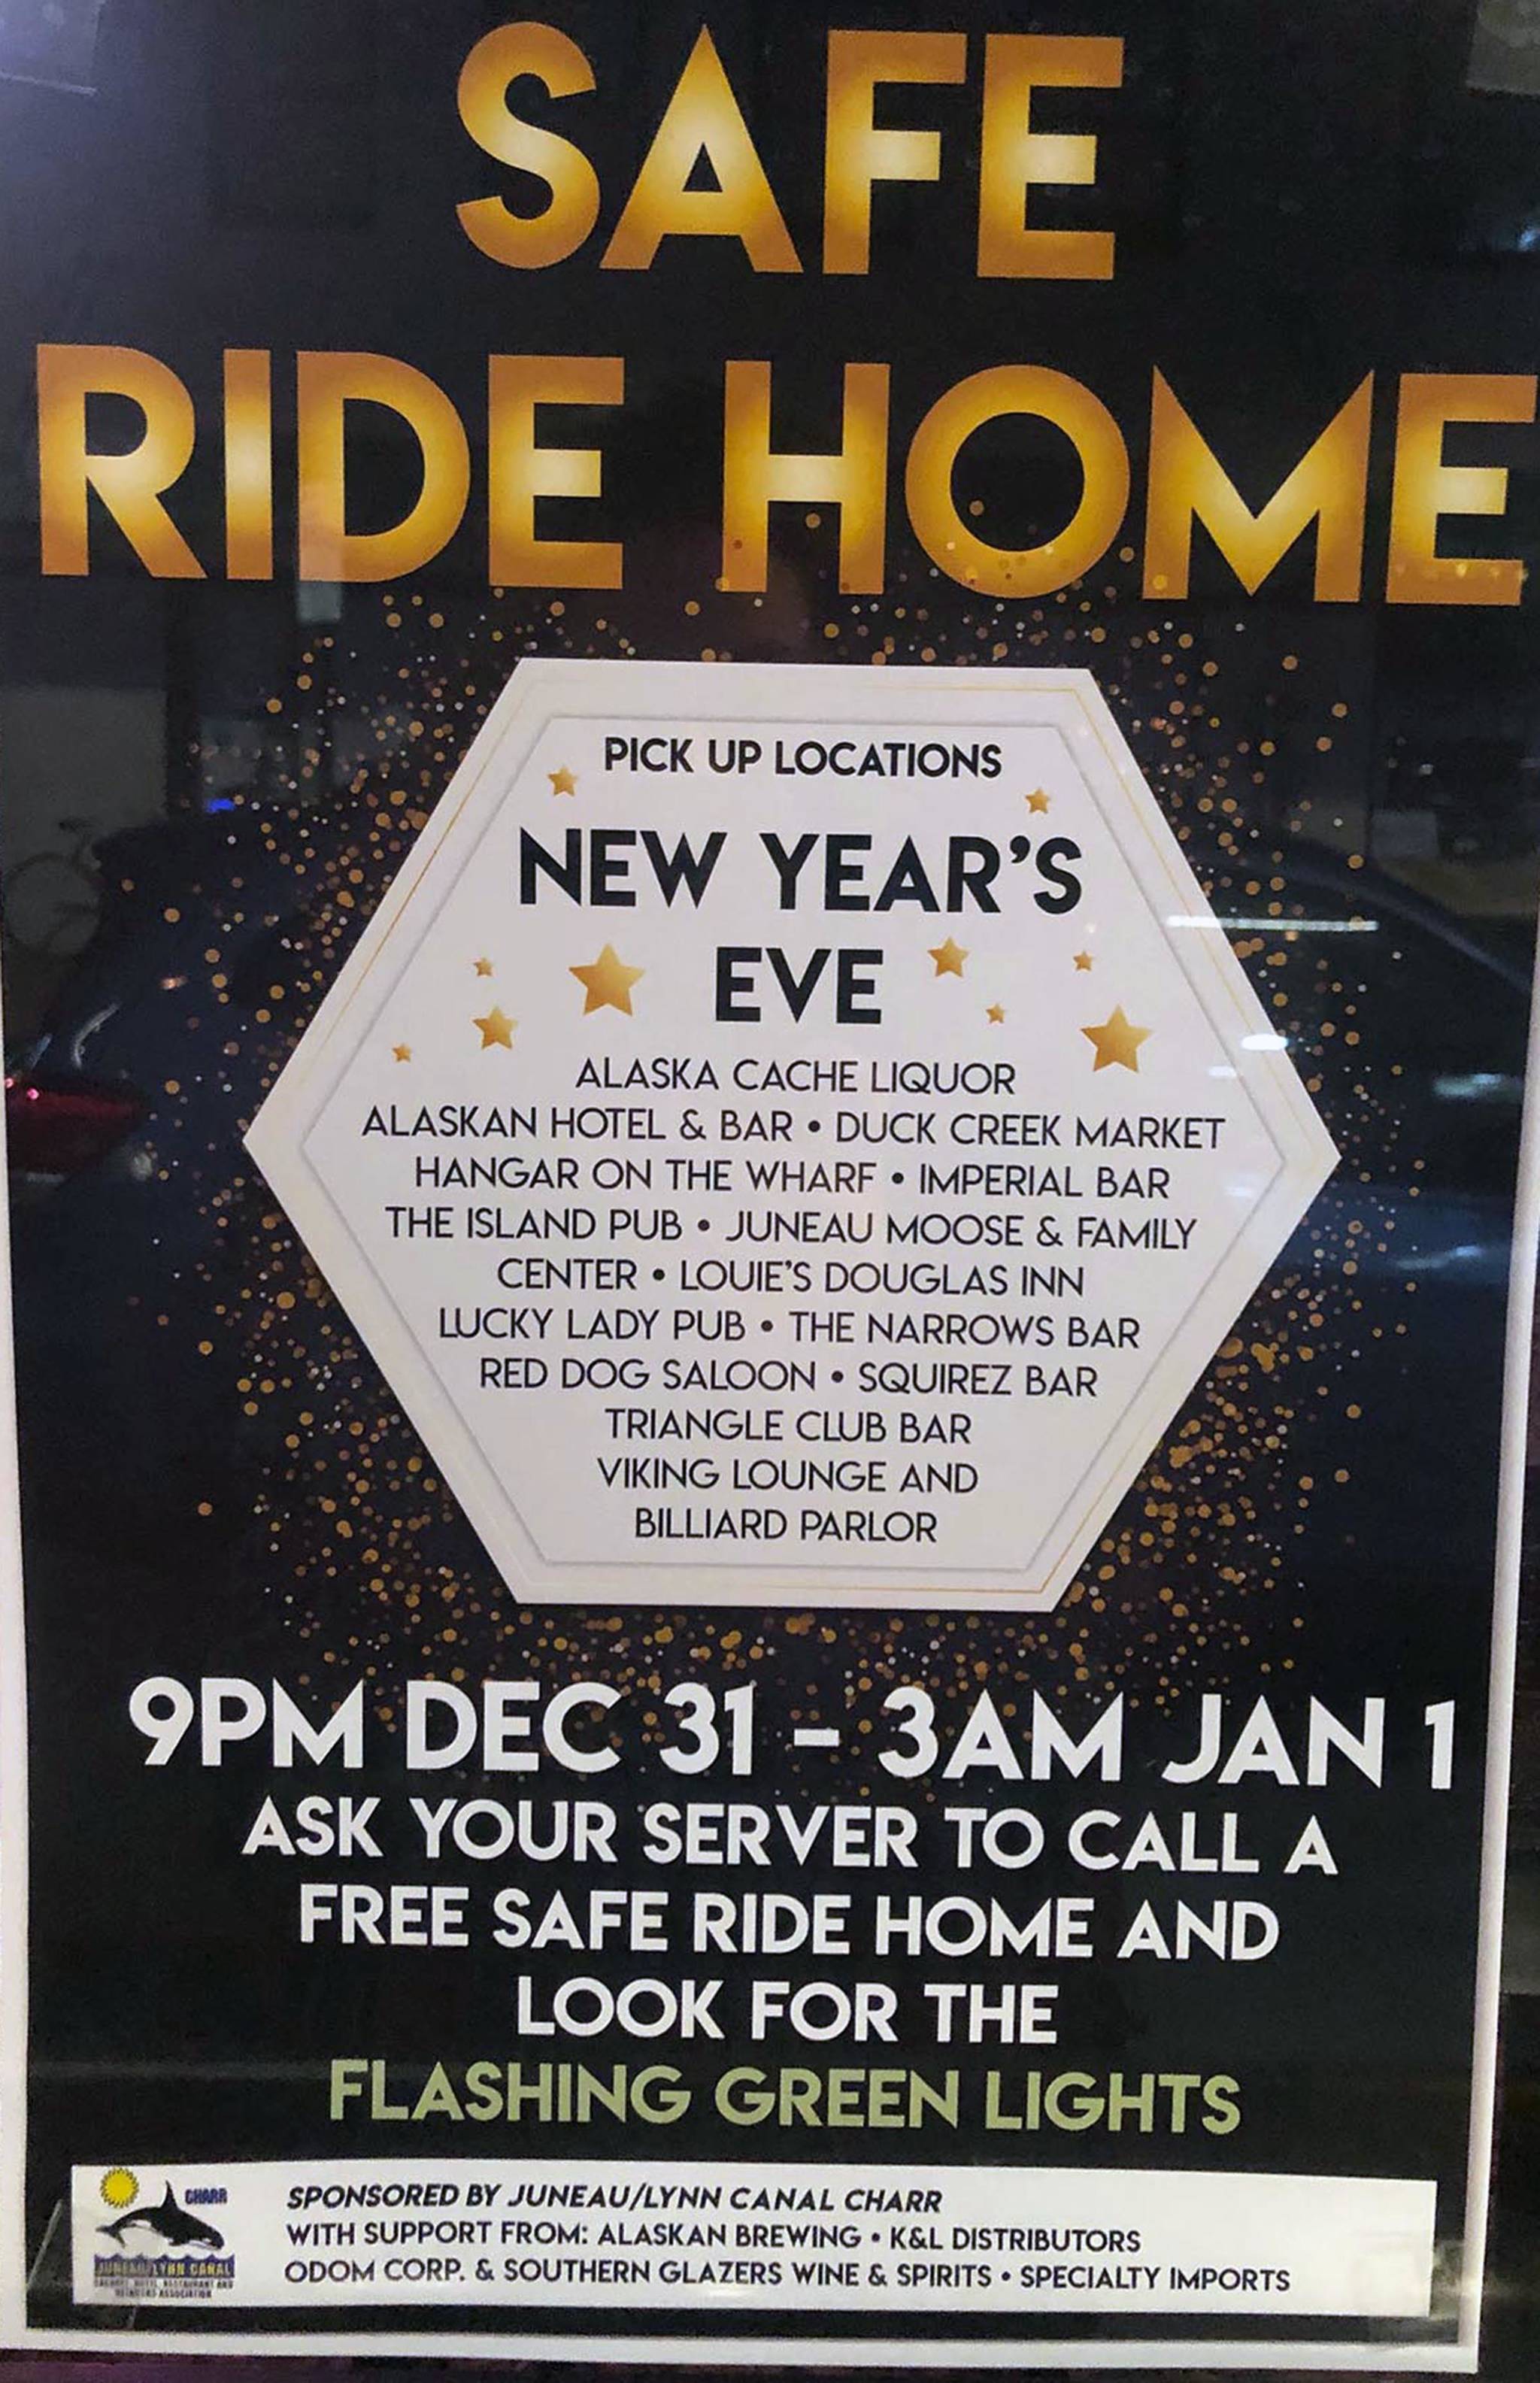 Don’t drink and drive on New Year’s Eve, ride safe for free